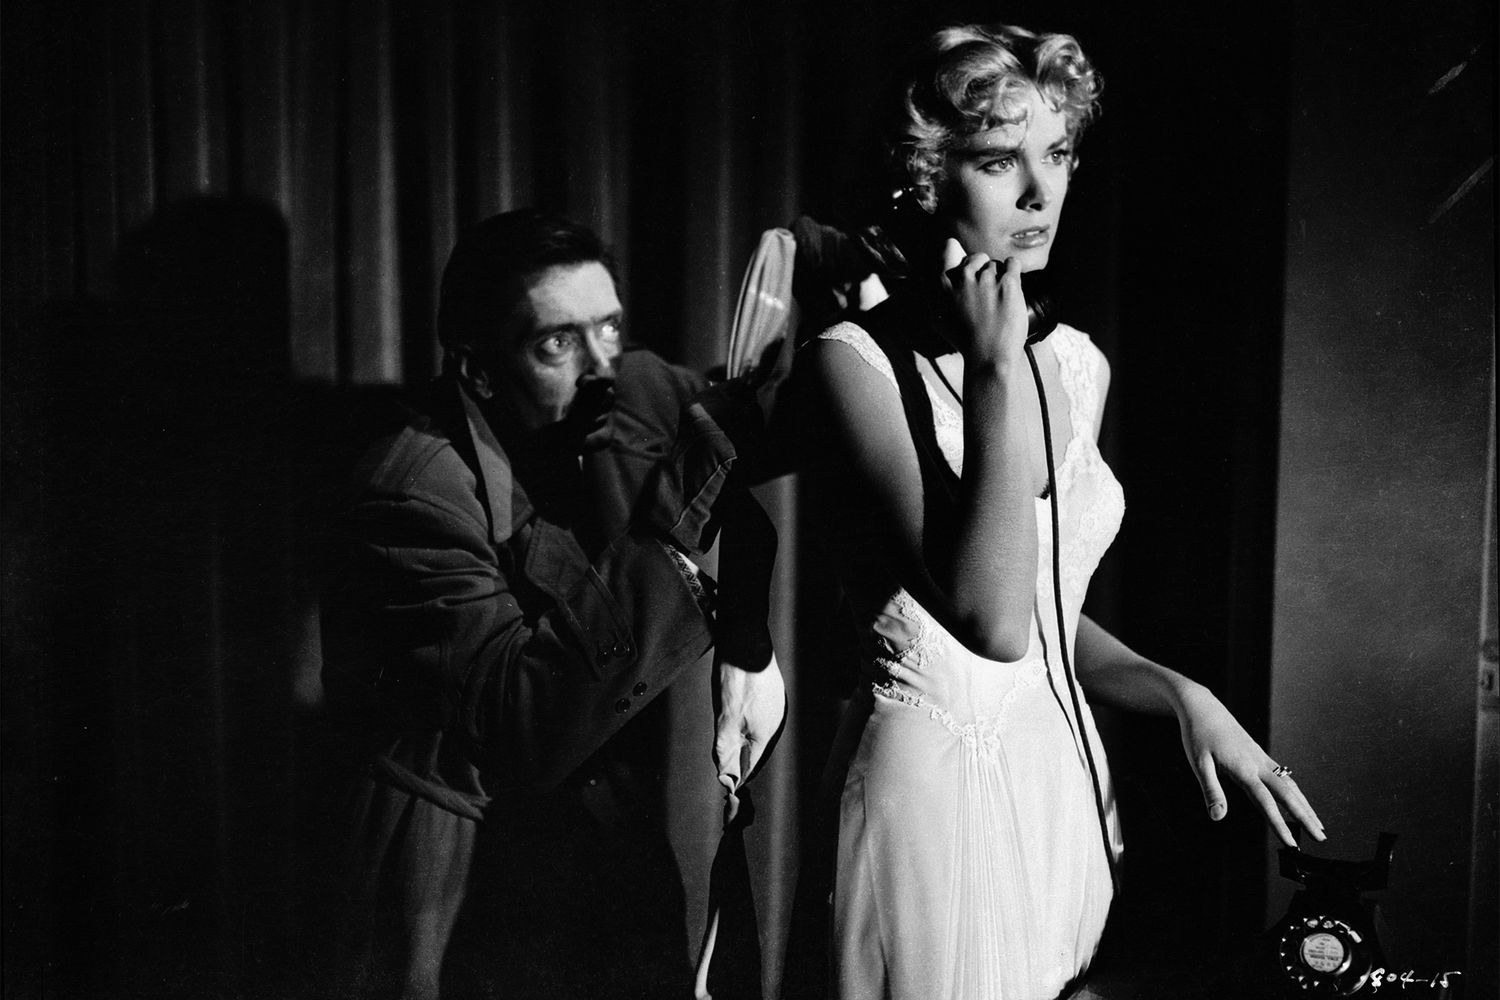 1954: Anthony Dawson (1916 - 1992) sneaks up behind an oblivious Grace Kelly (1929 - 1982) in a tense scene from the film 'Dial M For Murder', directed by Alfred Hitchcock. (Photo via John Kobal Foundation/Getty Images)